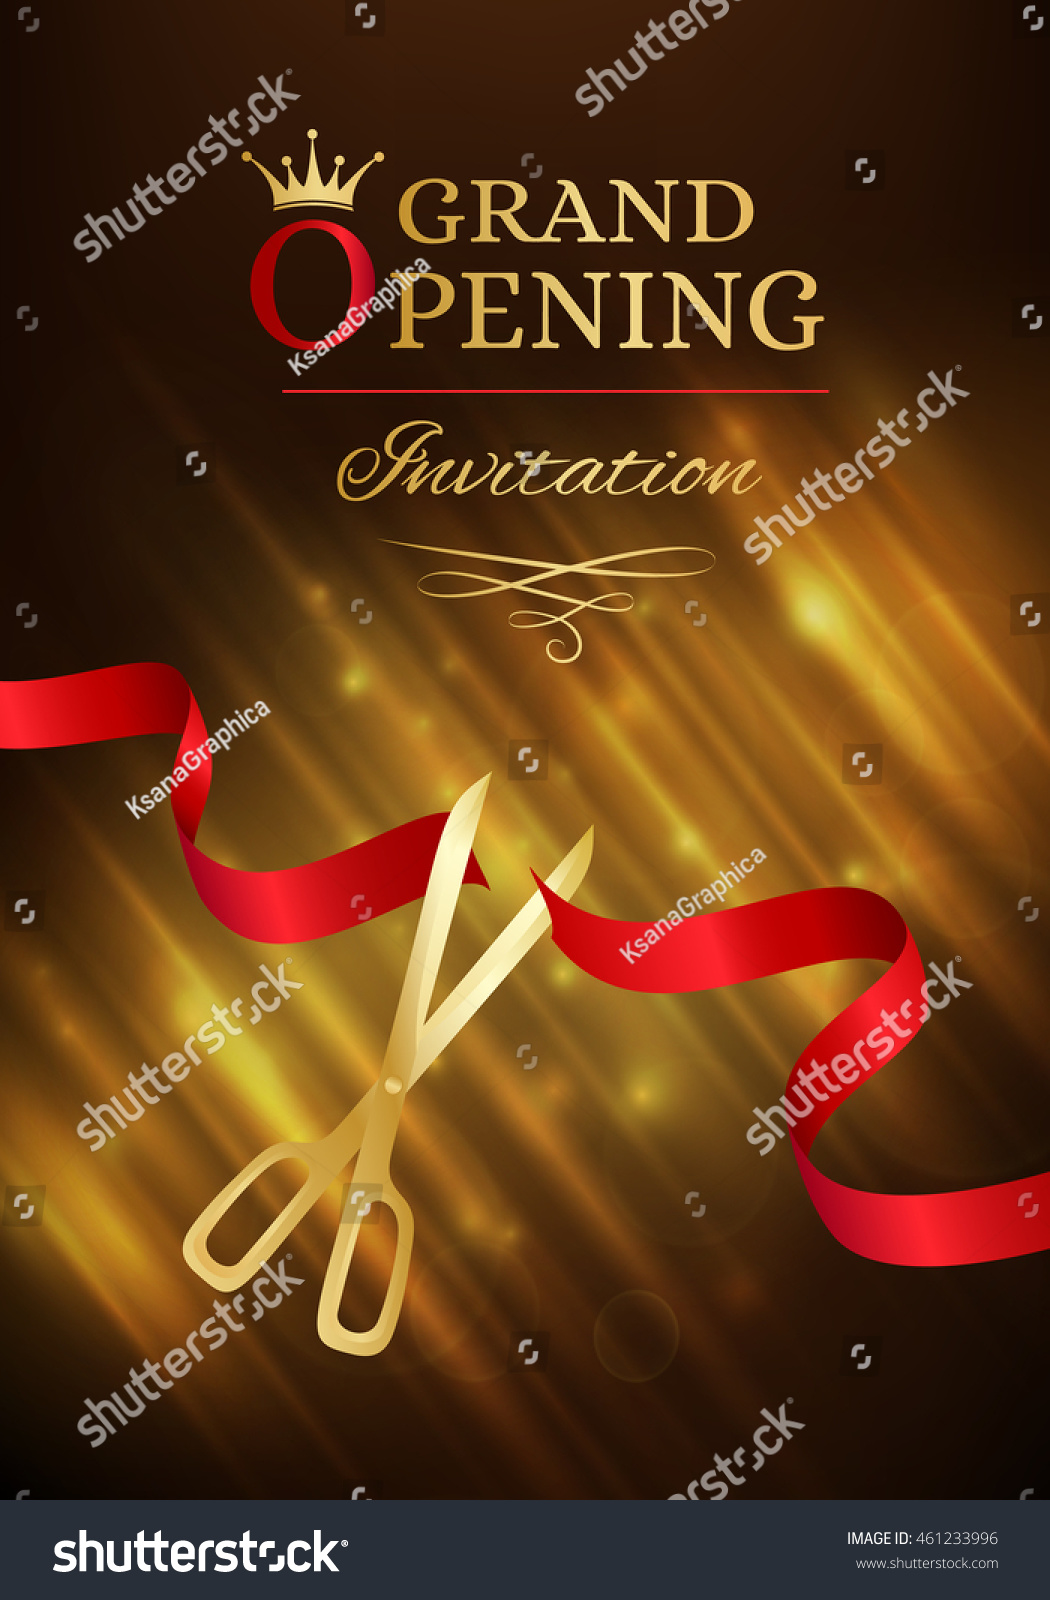 Grand Opening Invitation Card Cut Red Stock Vector 461233996 - Shutterstock